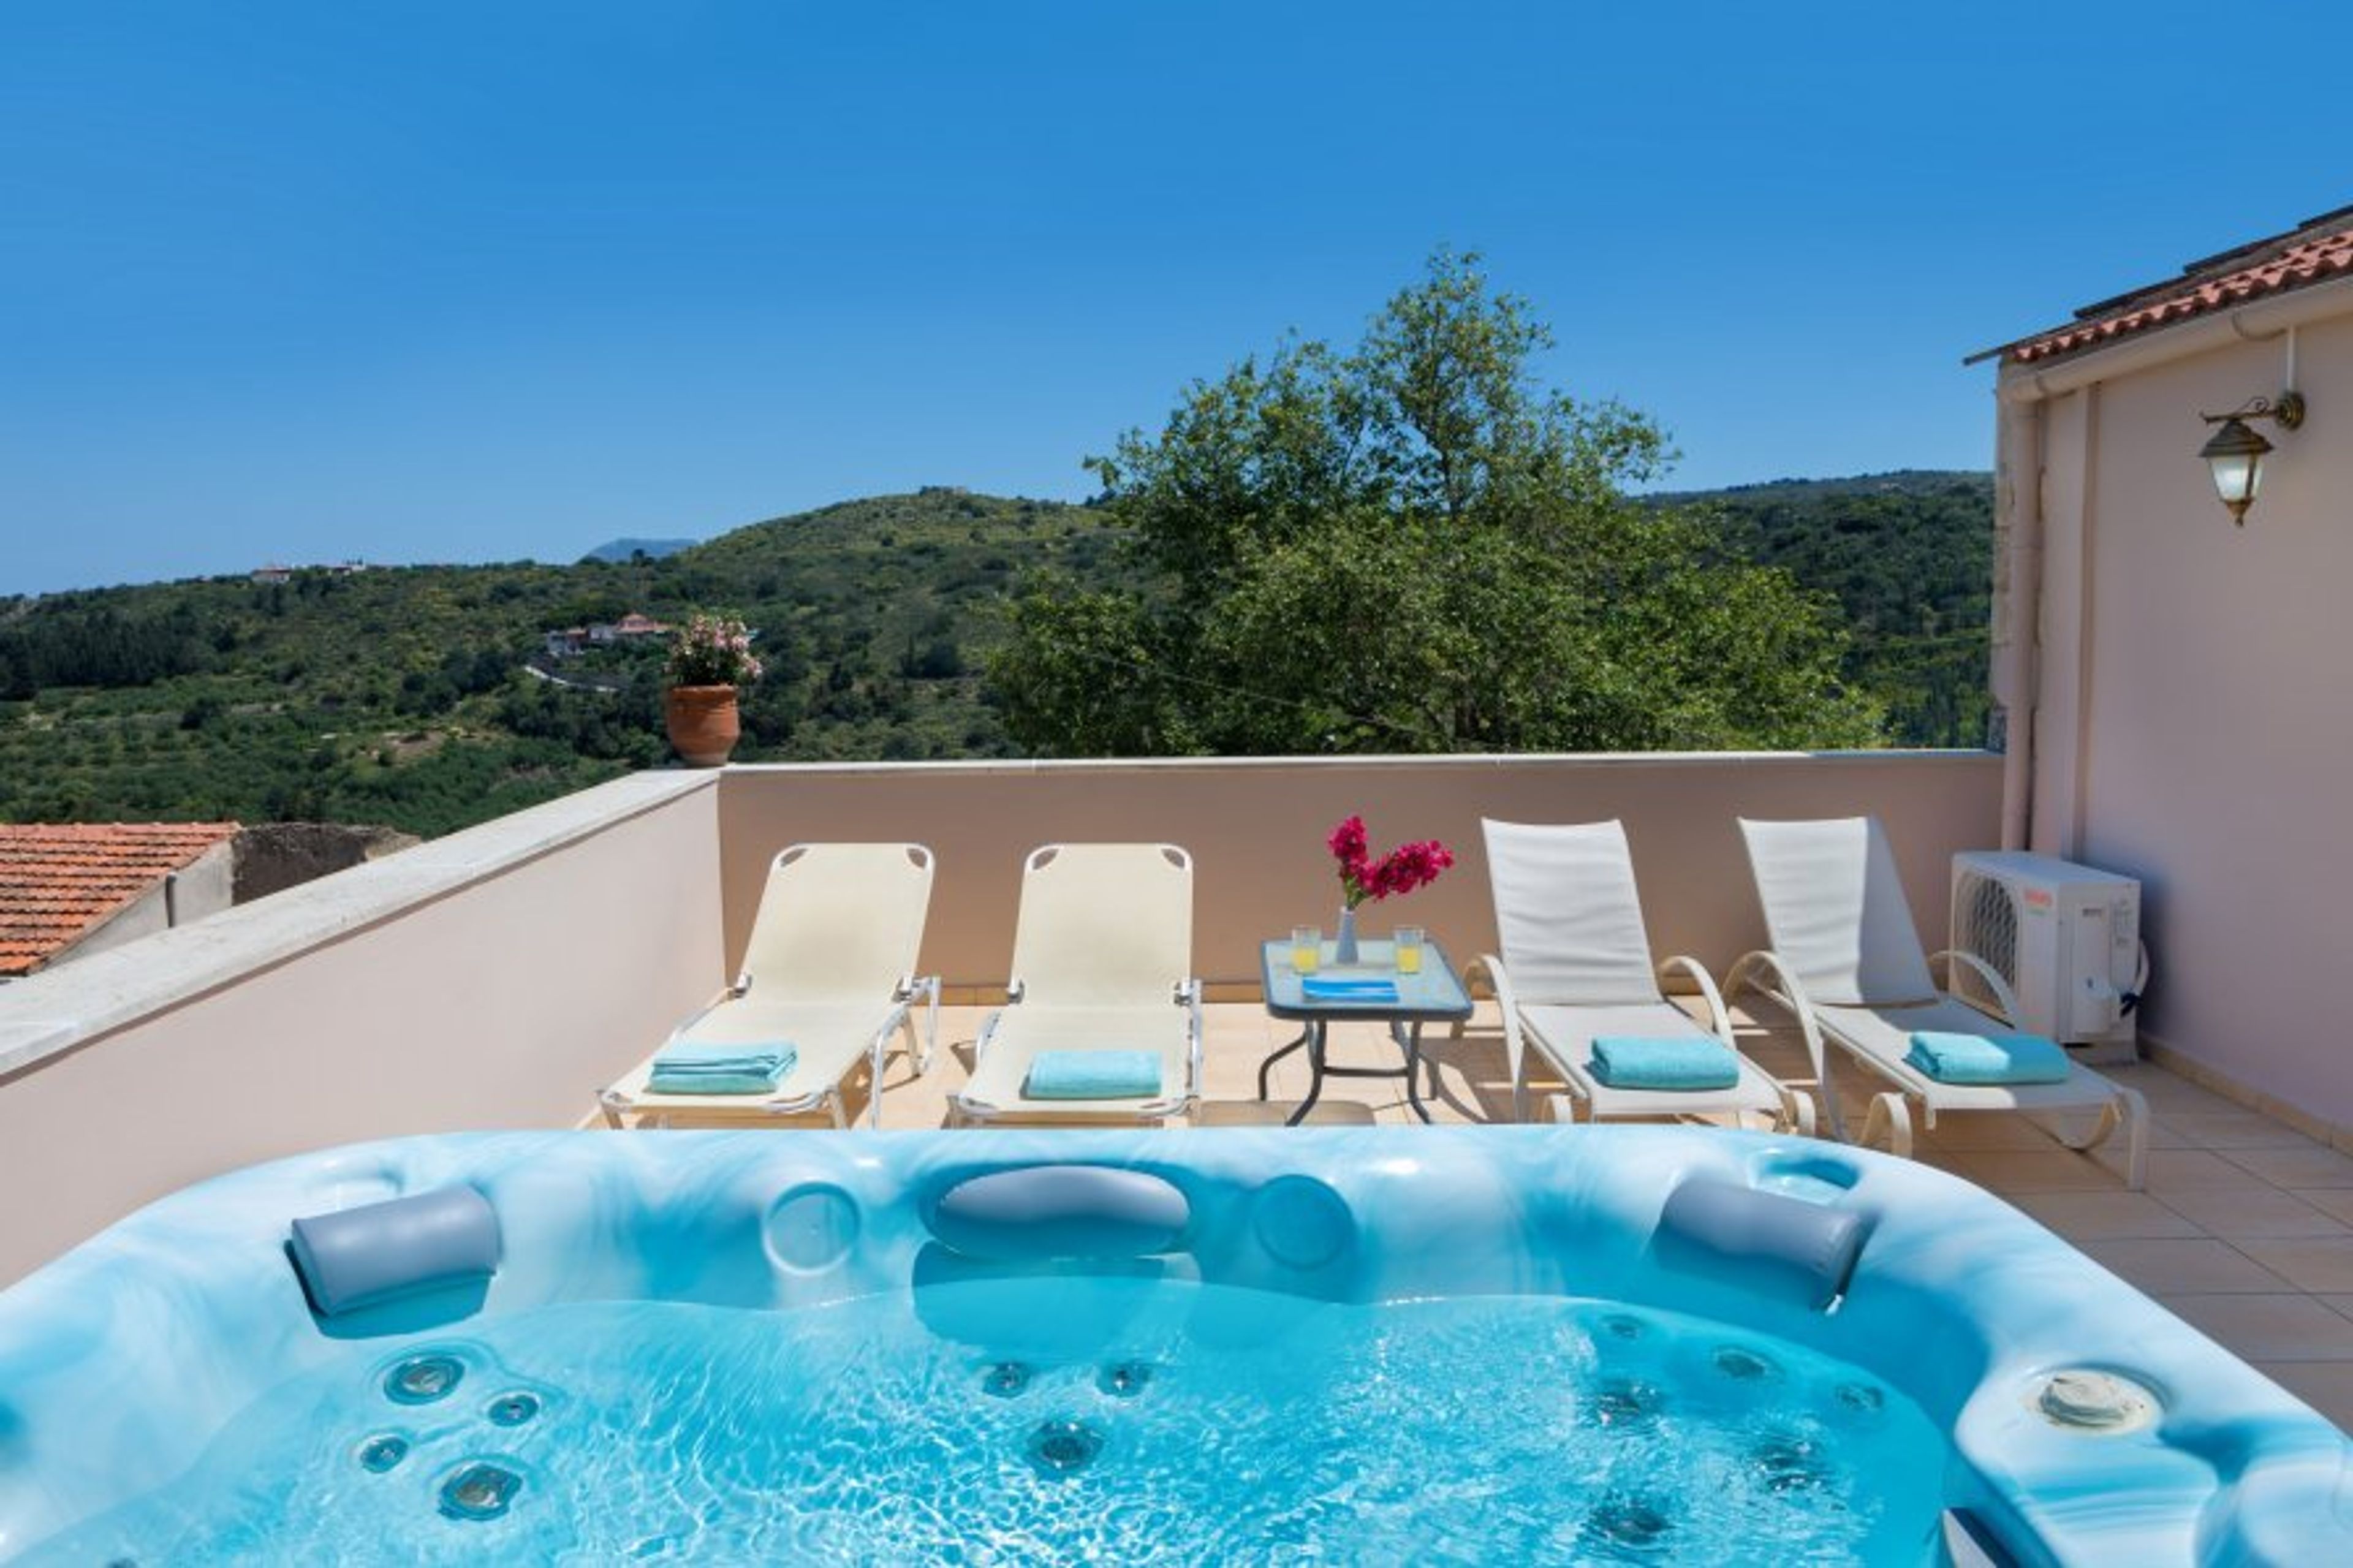 private heated jacuzzi on the terrace with sunbeds,umbrella and table